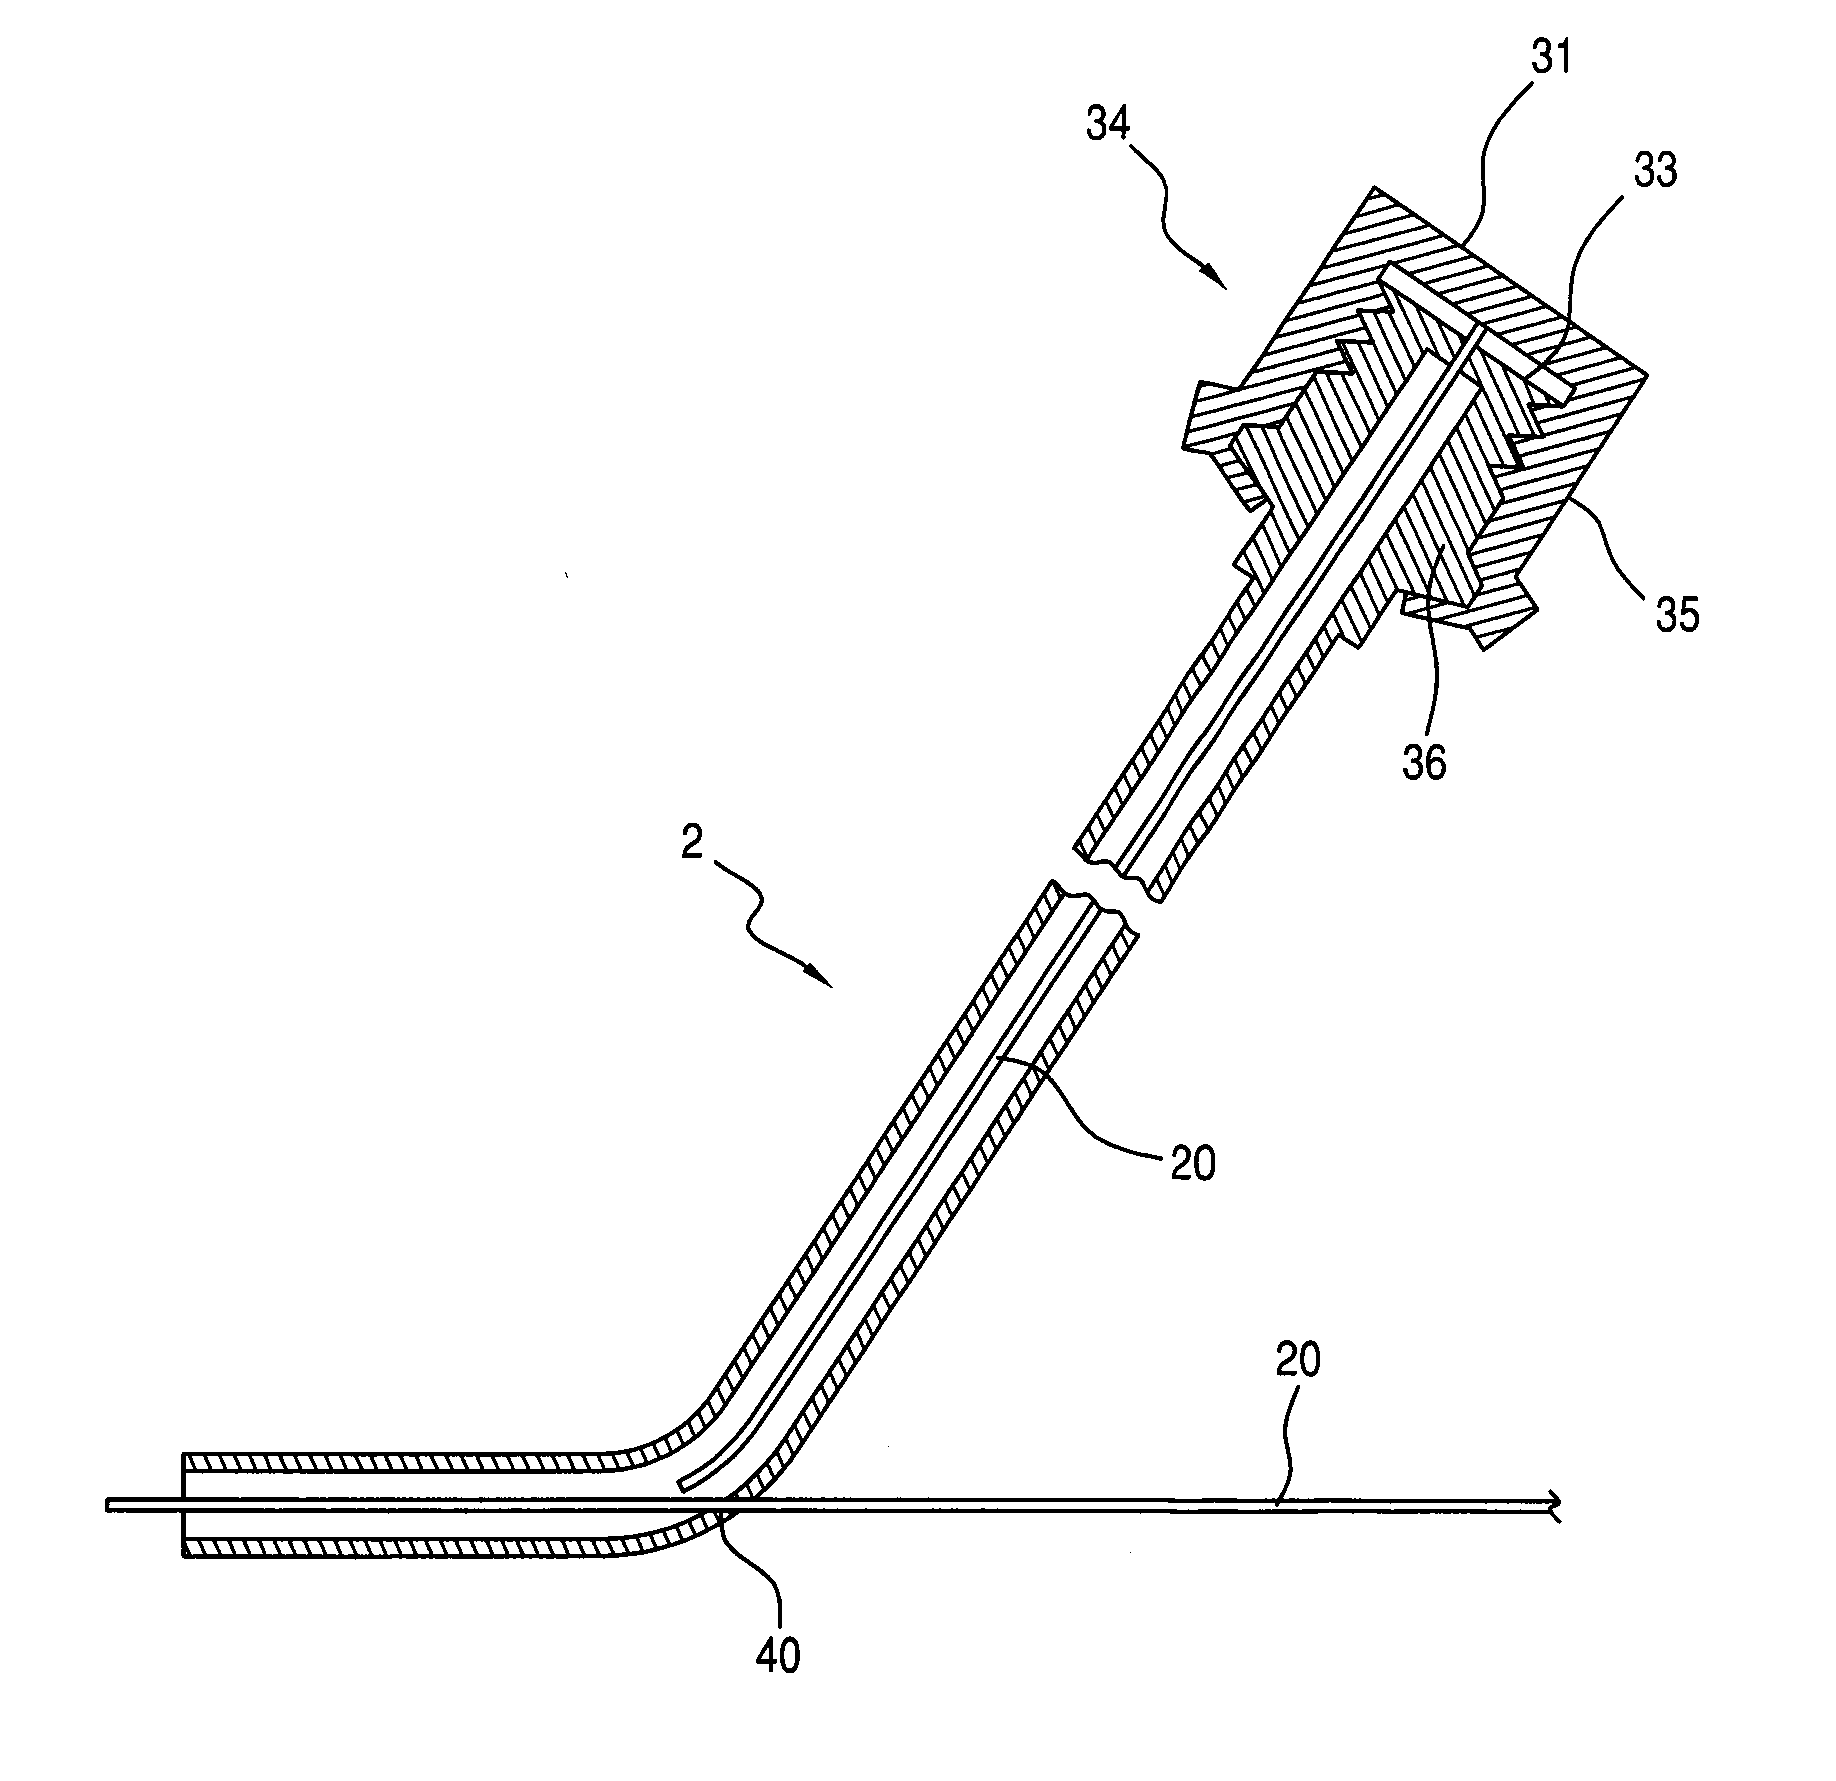 Medical Device for Anchoring a Guidewire During a Percutaneous Coronary Intervention